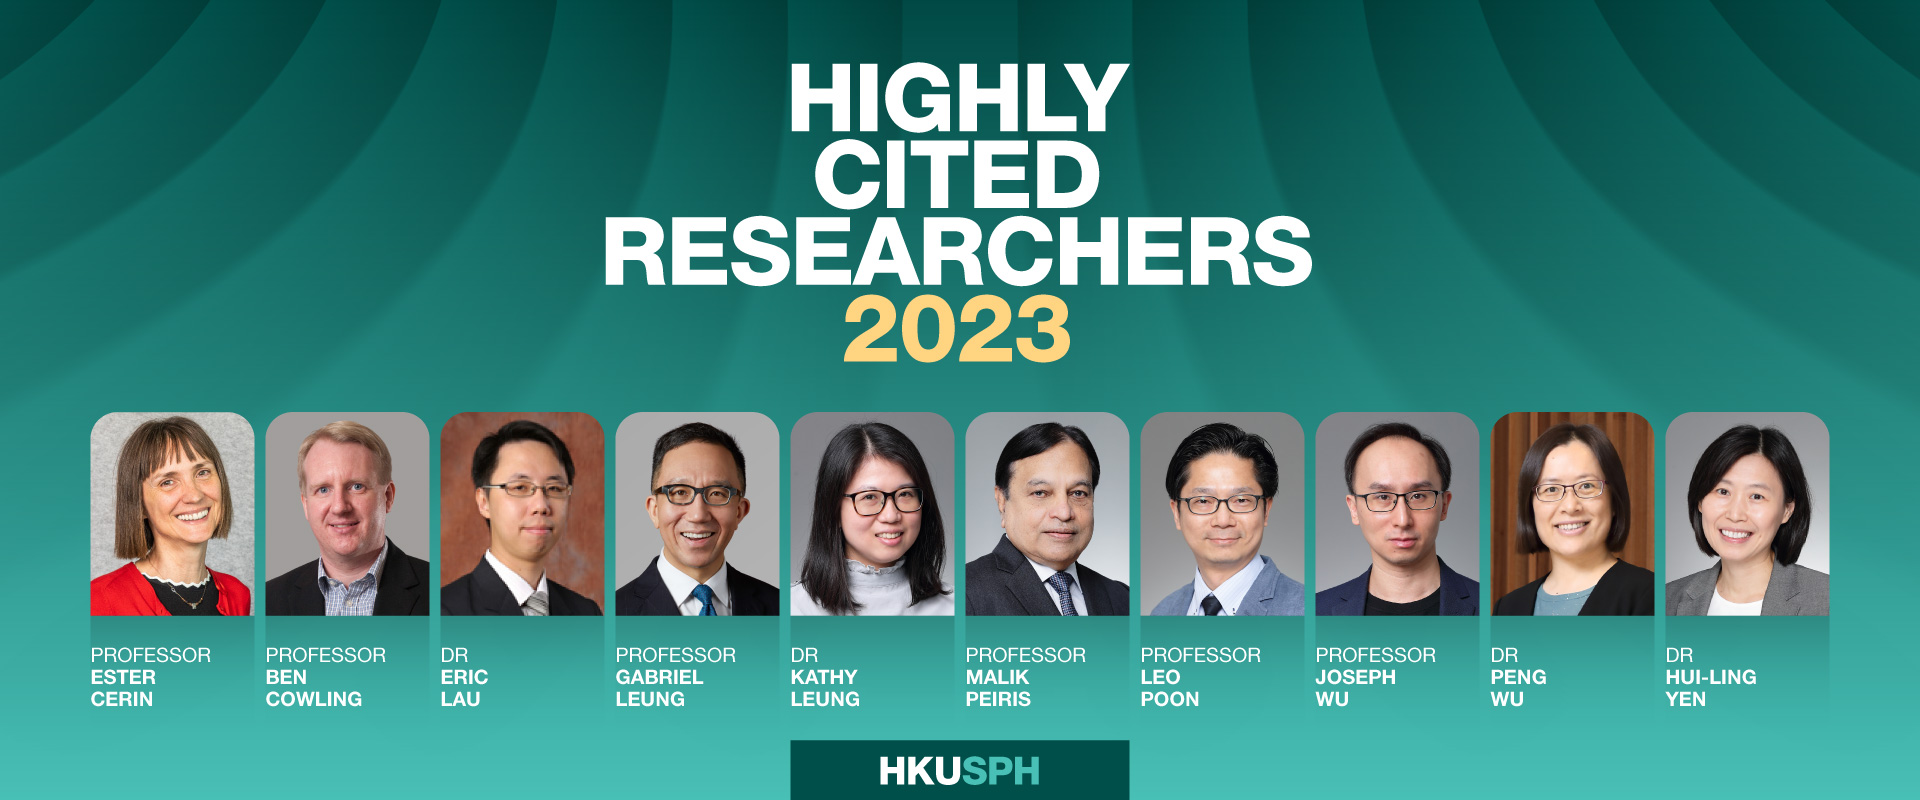 TEN SPH ACADEMICS NAMED AMONGST THE WORLD'S HIGHLY CITED RESEARCHERS IN 2023